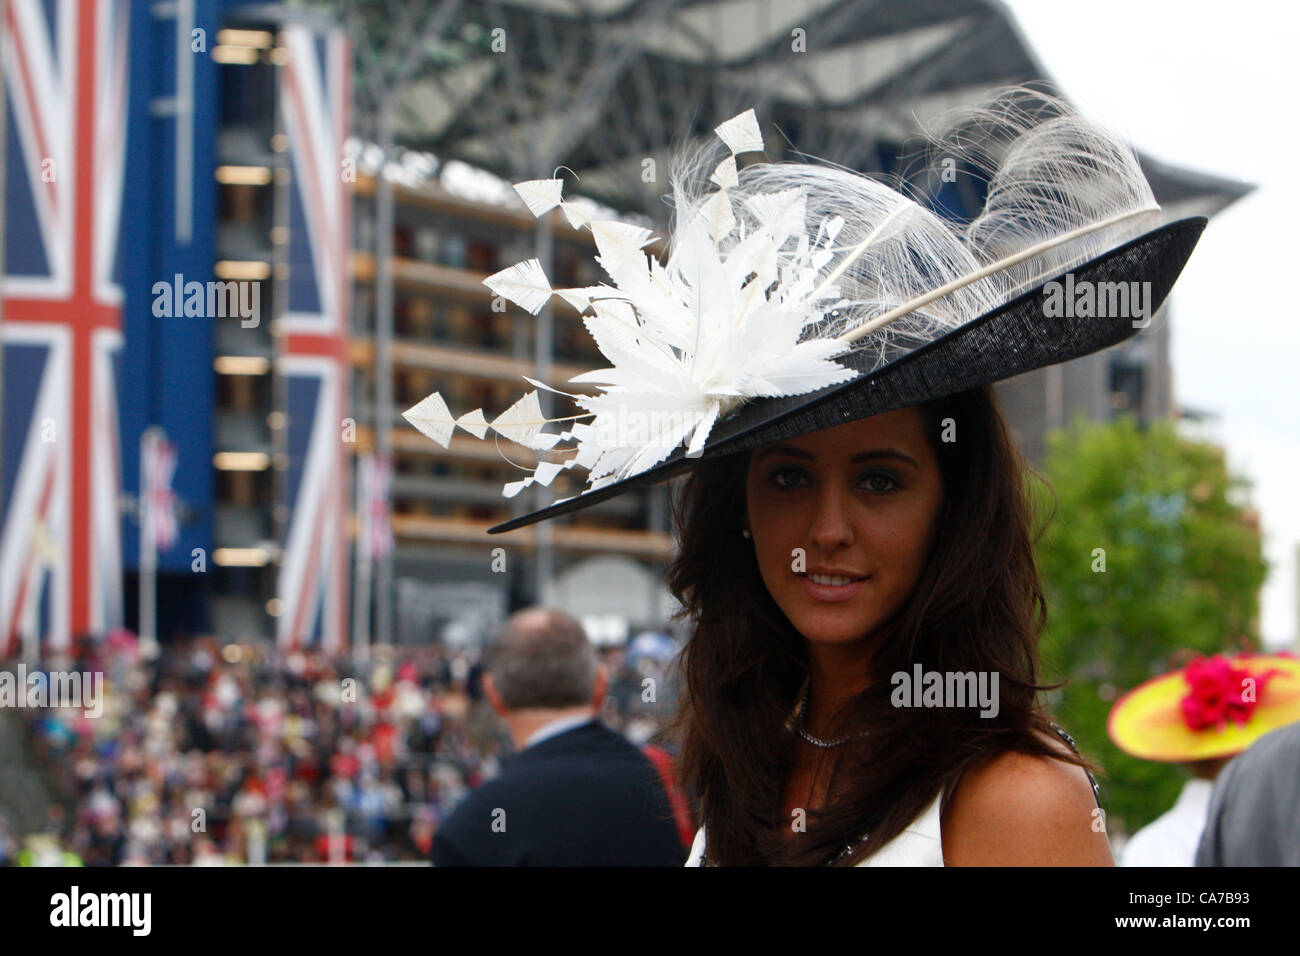 21.06.12 Ascot, Windsor, ENGLAND:   during Ladies Day Royal Ascot Festival at Ascot racecourse on June 21, 2012 in Ascot, England. Stock Photo